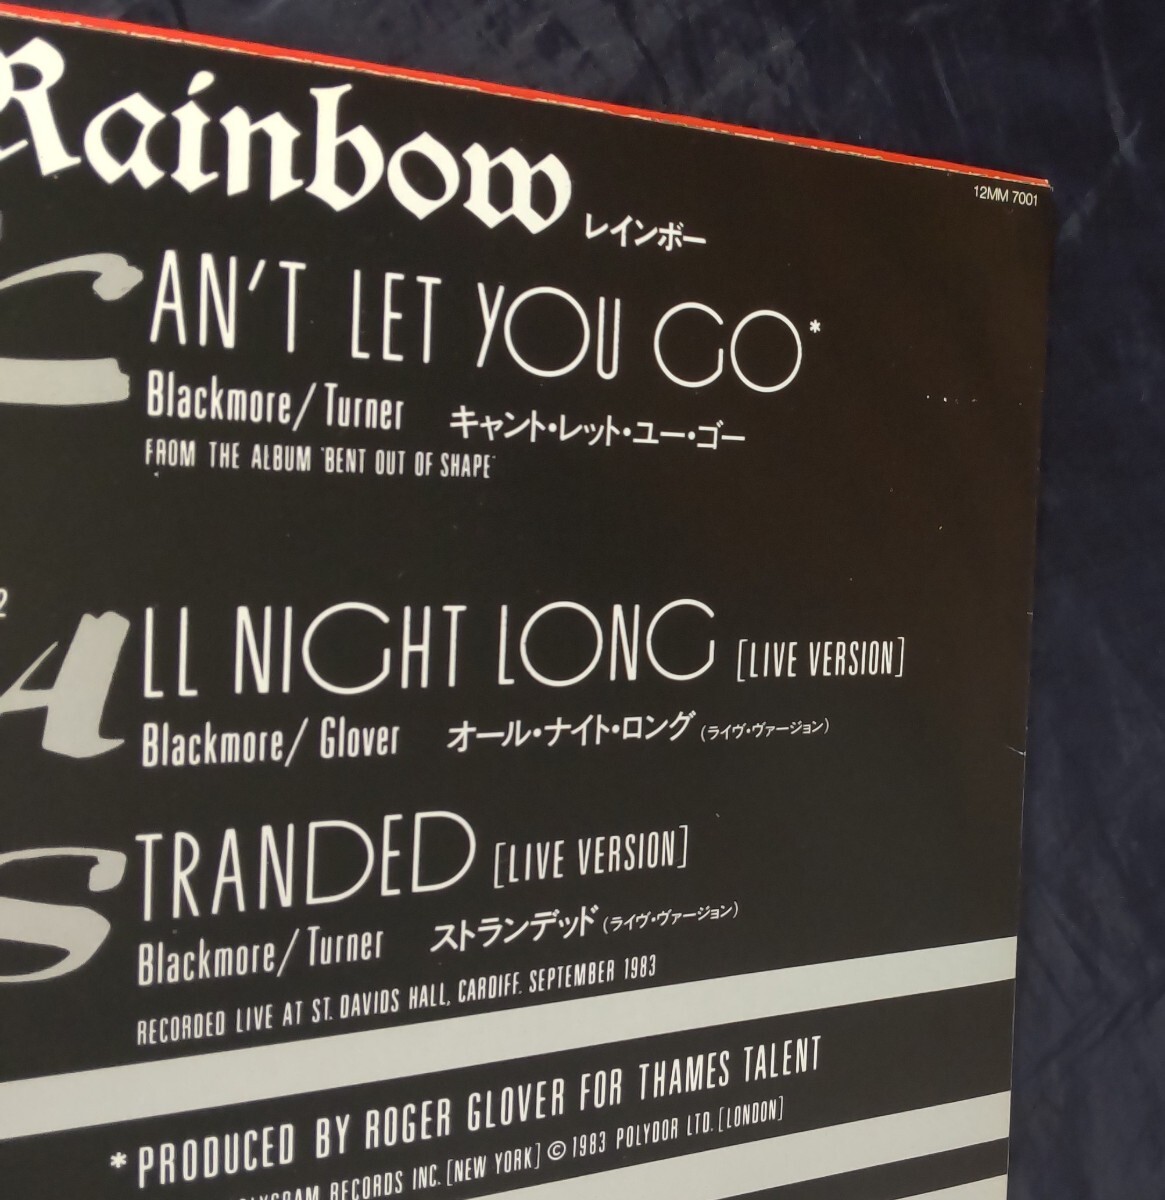 12inch45回転盤アナログレコード「レインボー/キャント・レット・ユー・ゴー」RAINBOW/CAN'T LET YOU GO,ALL NIGHT LONG(LIVE), STRANDED_画像9